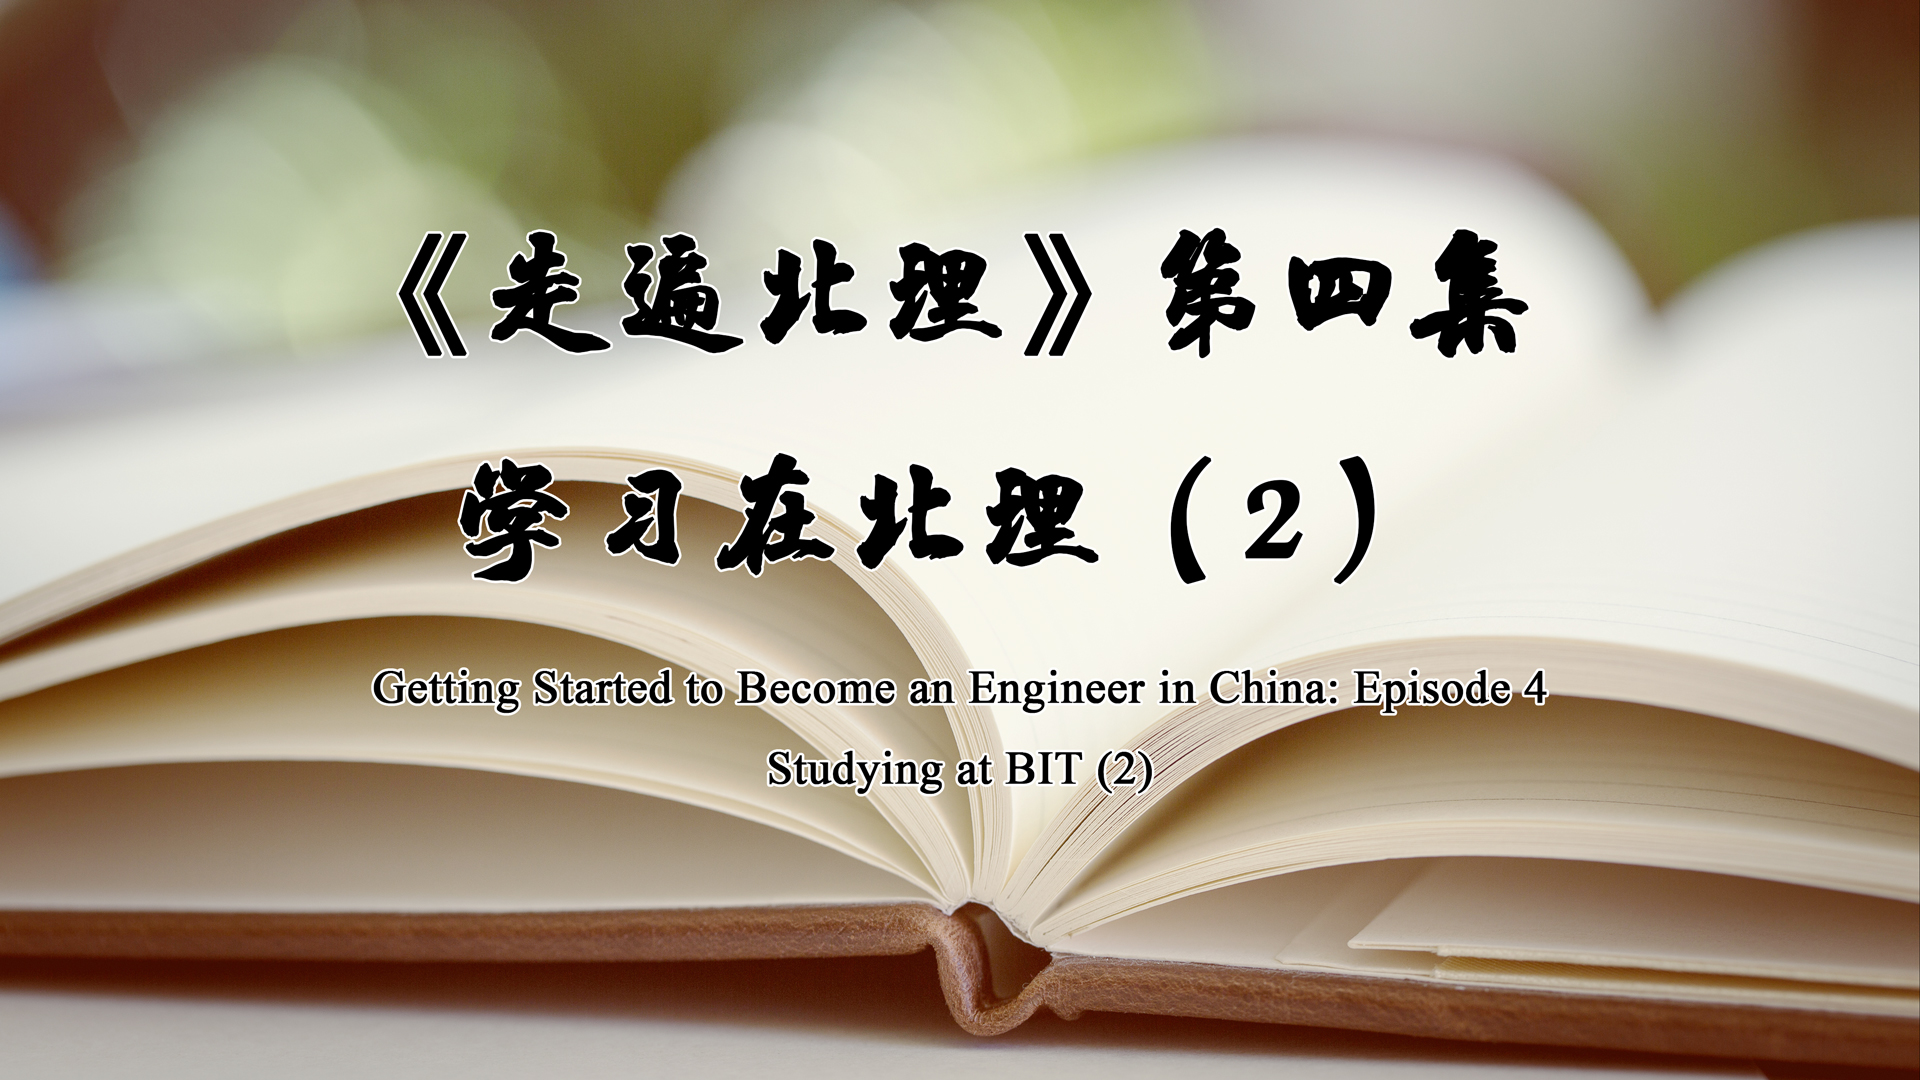 Getting started to become an engineer in China-Episode 4: Studying at BIT (2)